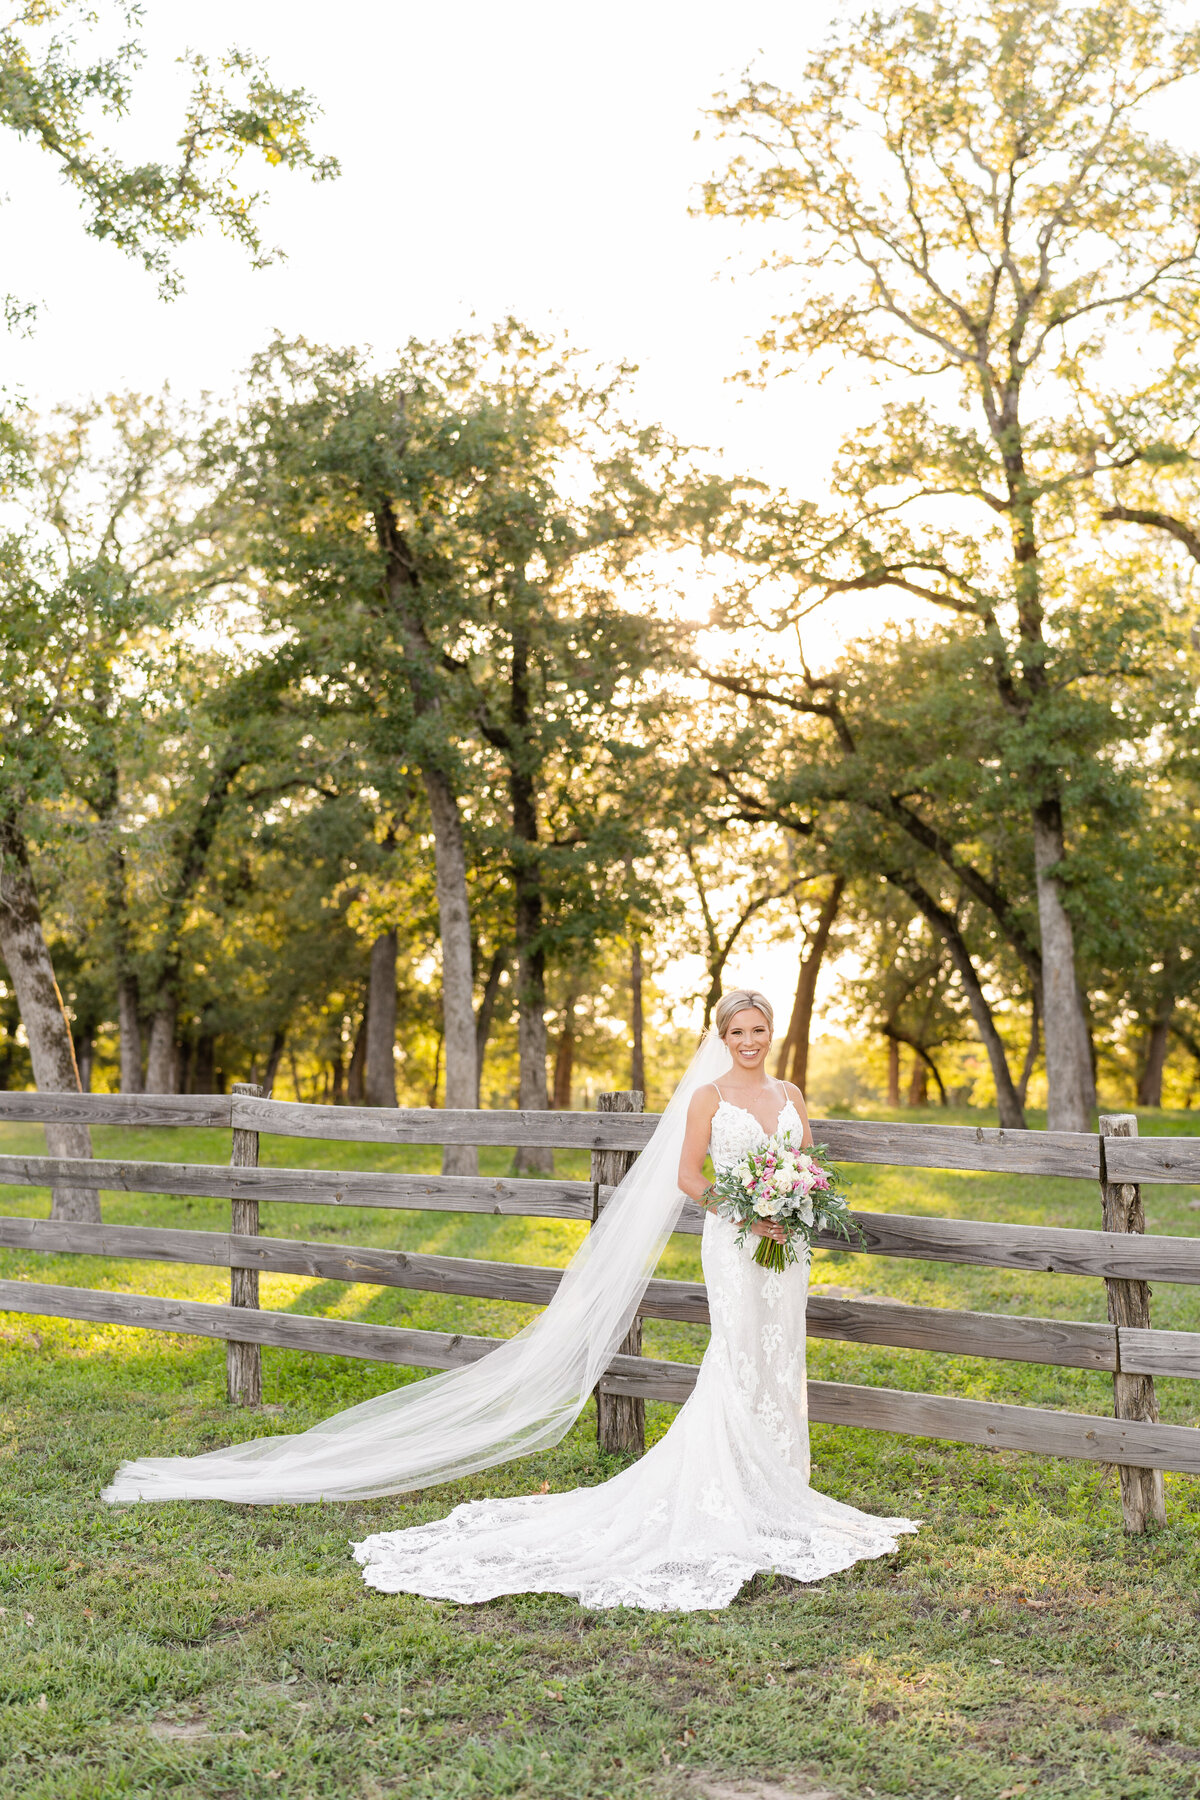 Bride holding bouquet with cathedral veil and smiling at camera next to a wooden fence and tall trees at sunset